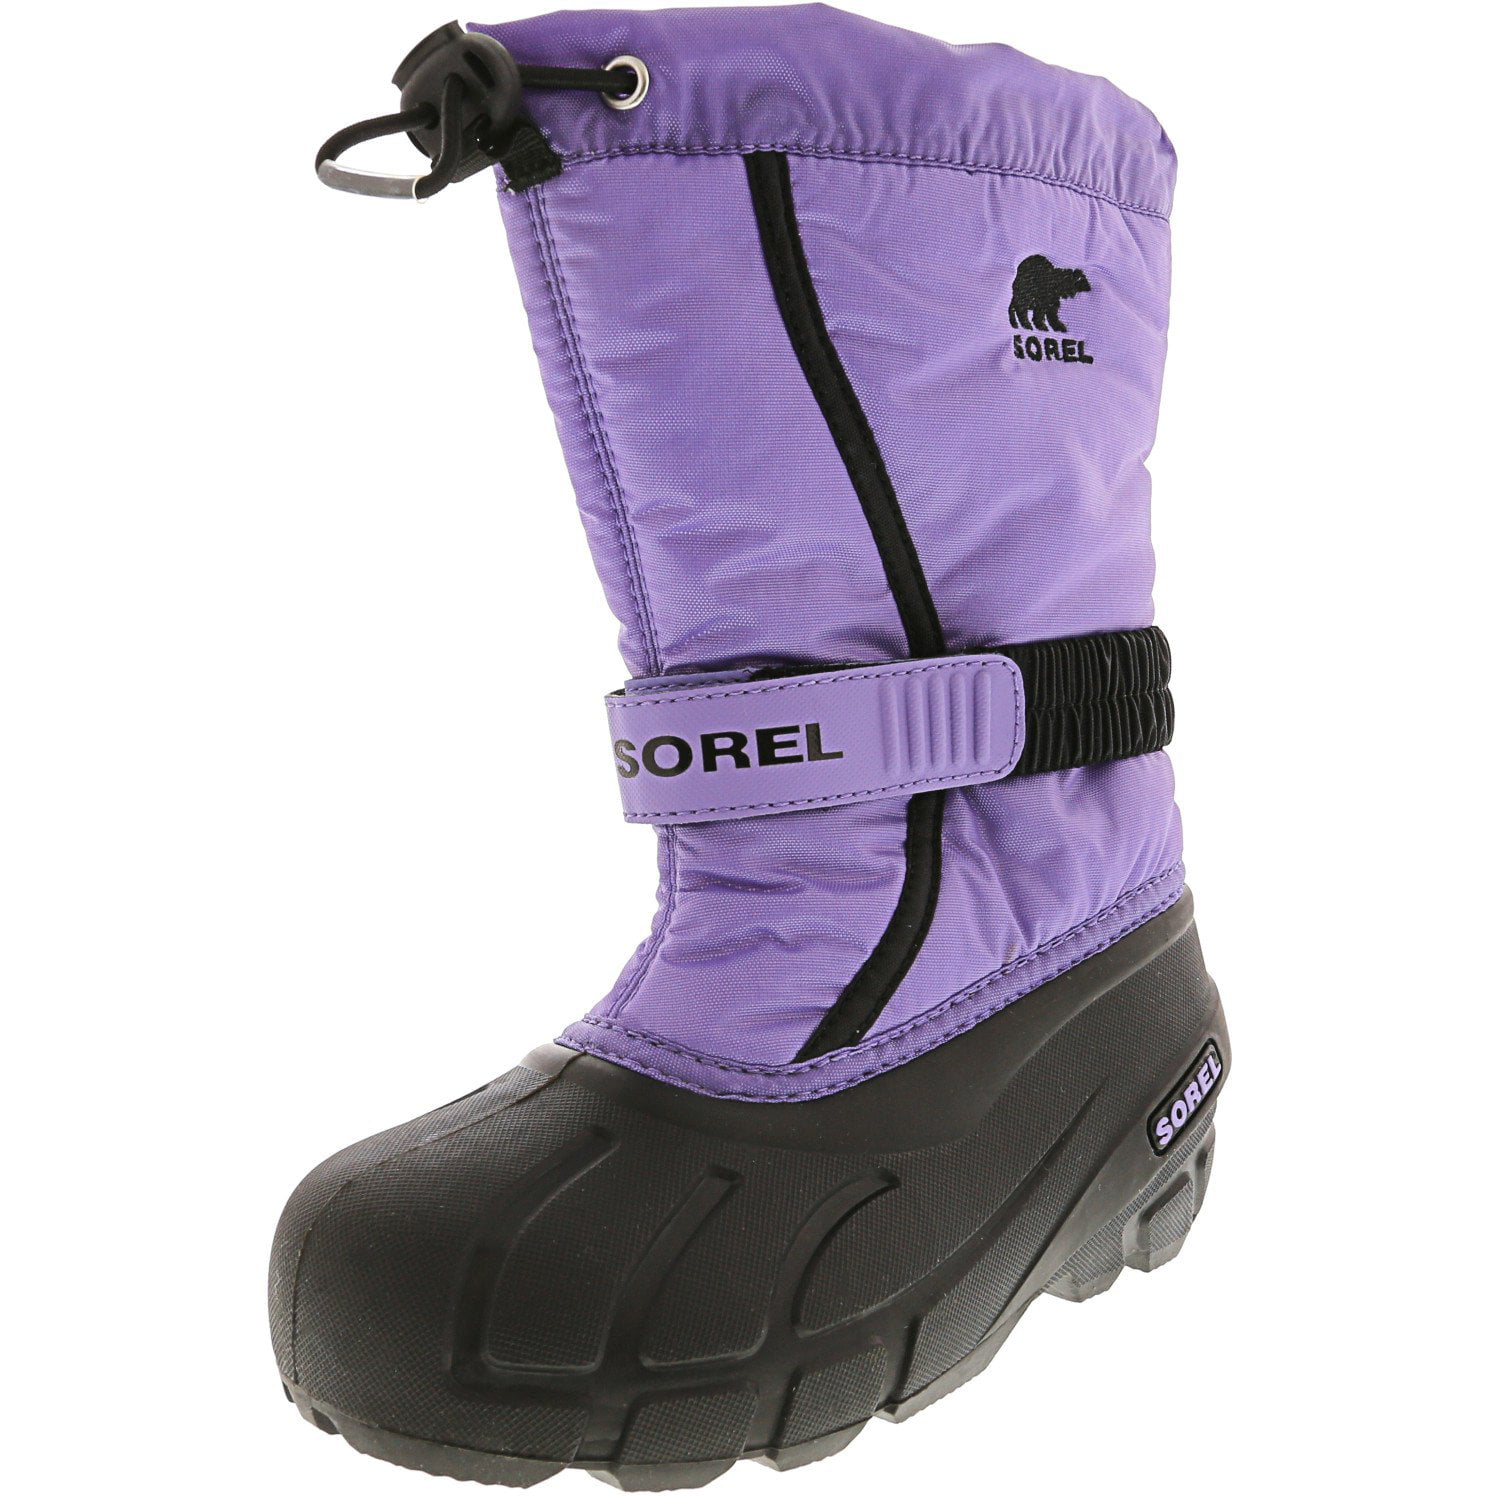 SOREL TODDLR WATERPROOF WINTER SNOW BOOTS REMOVABLE LINING RATED TO -40 SIZE 7 